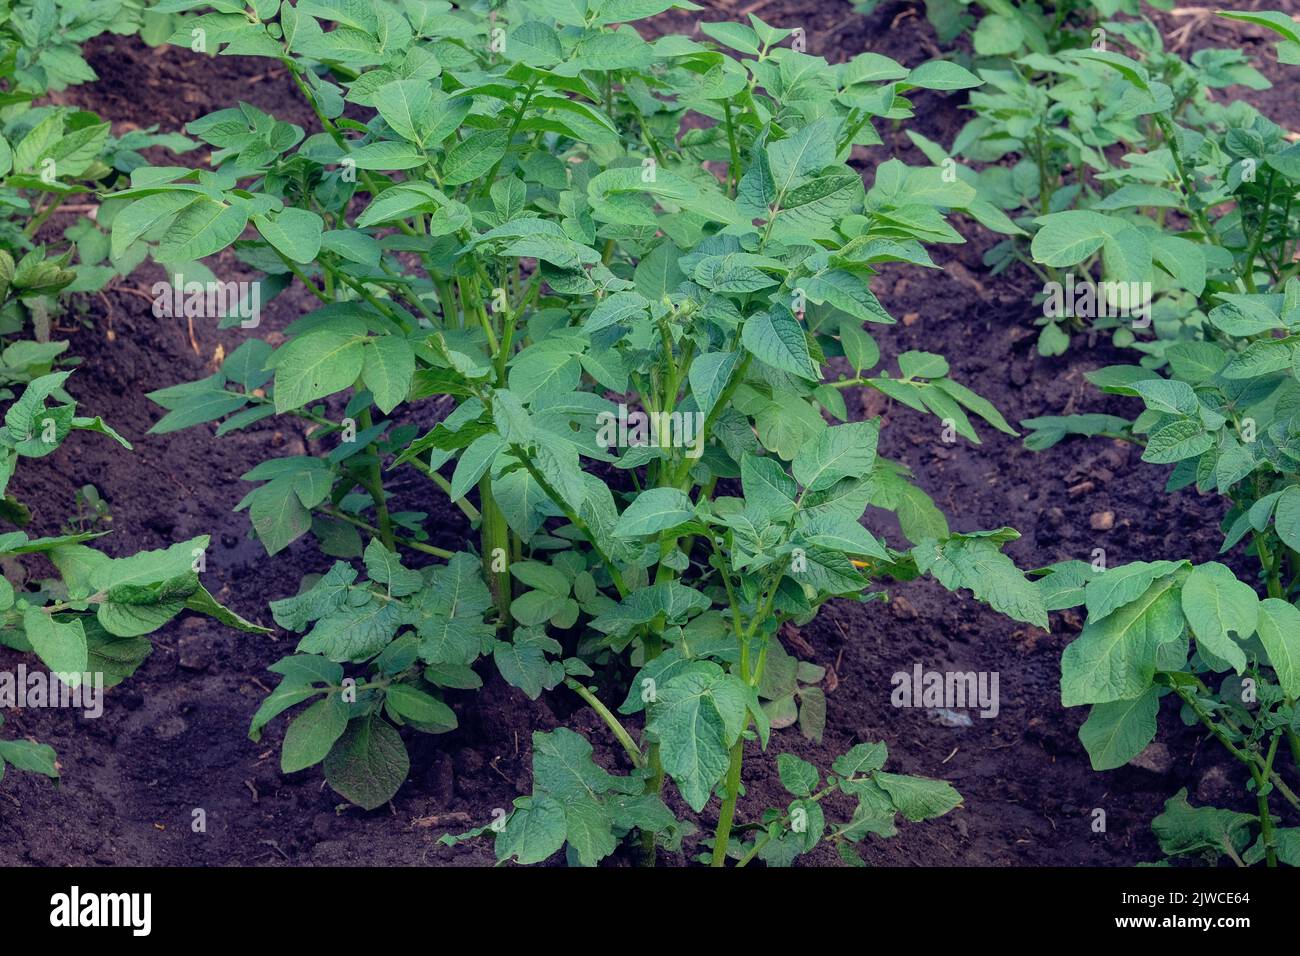 Potato bush is growing in rustic garden. Organic green bush in farming and harvesting. Growing vegetables at home. Stock Photo